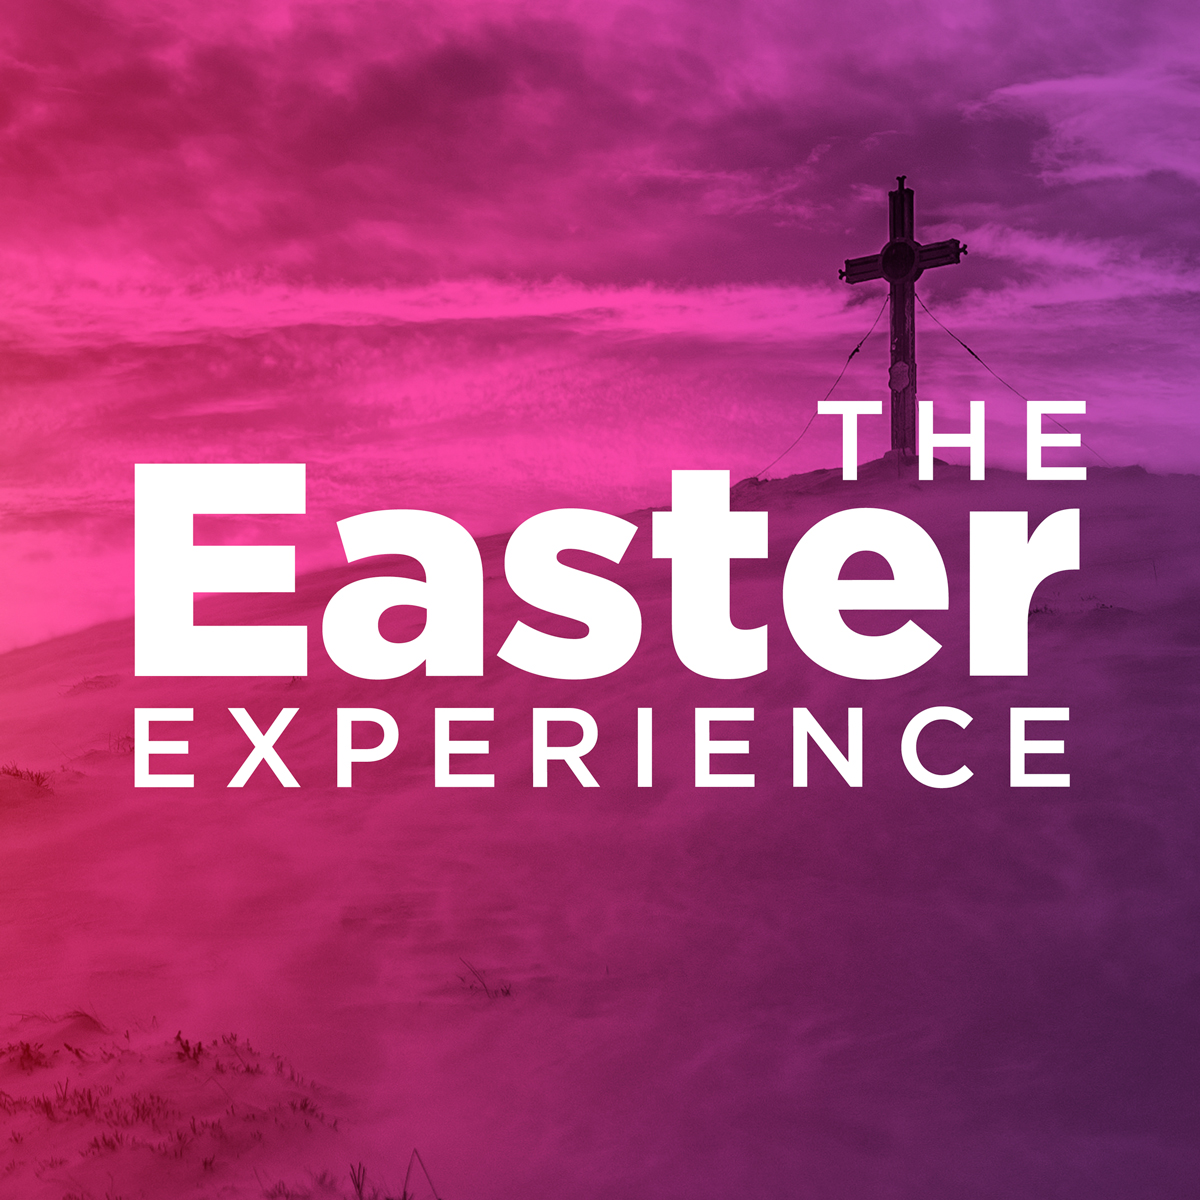 The Easter Experience - Week 3 - My Life Has Hope (3-4-18)